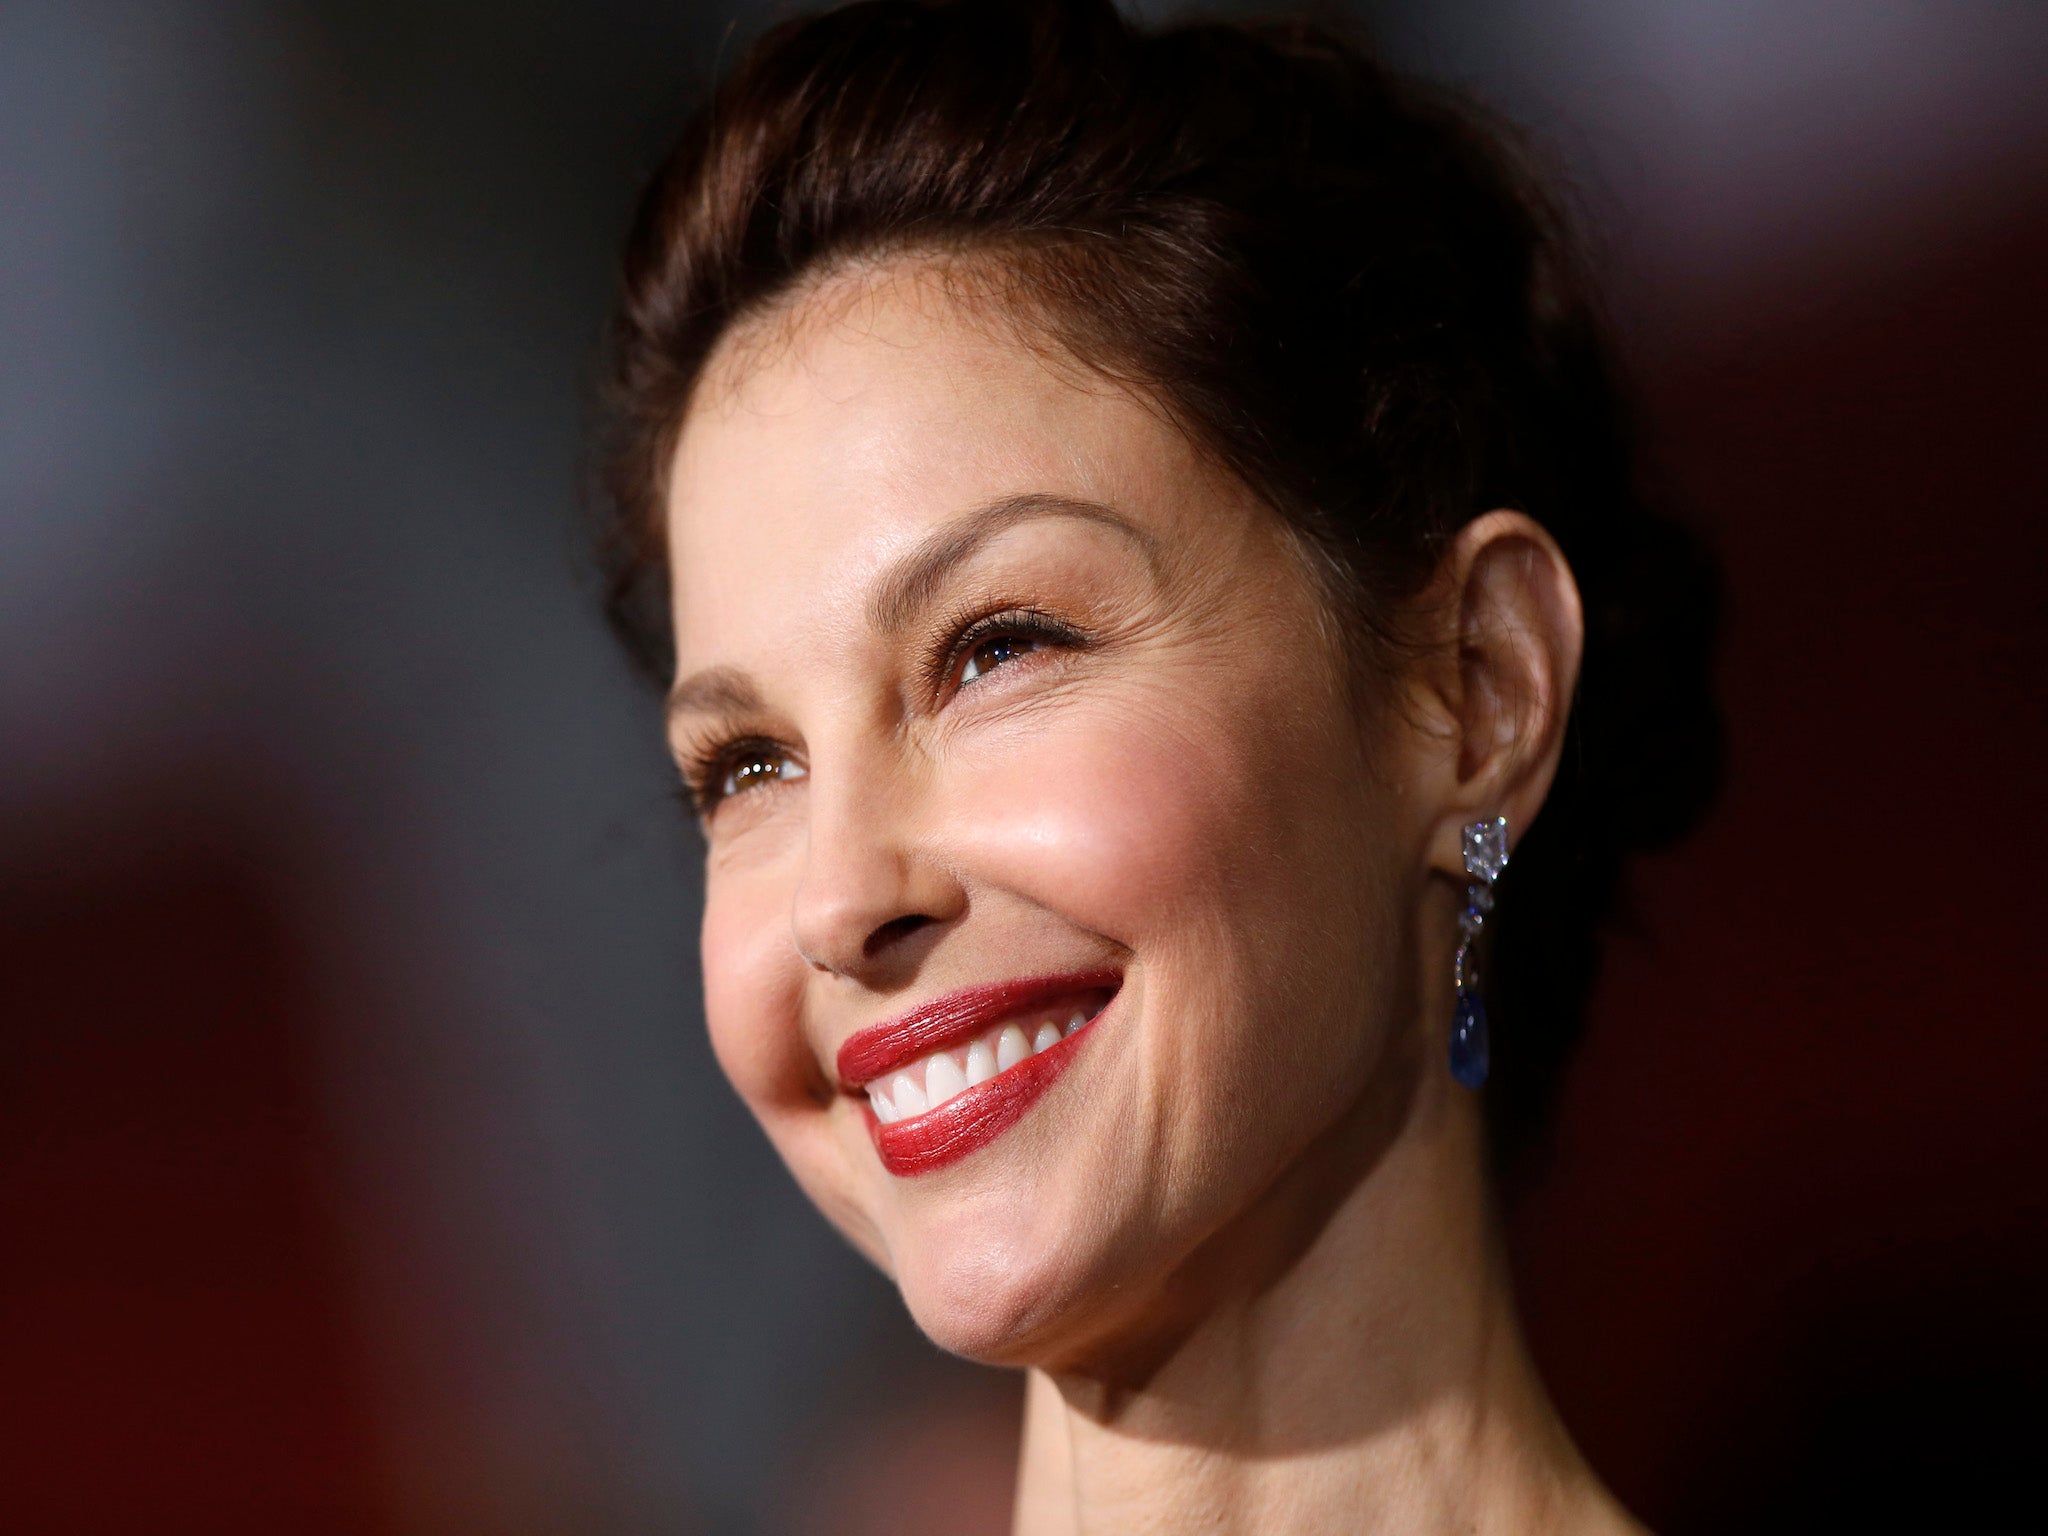 Ashley Judd said she will report the abuse to police